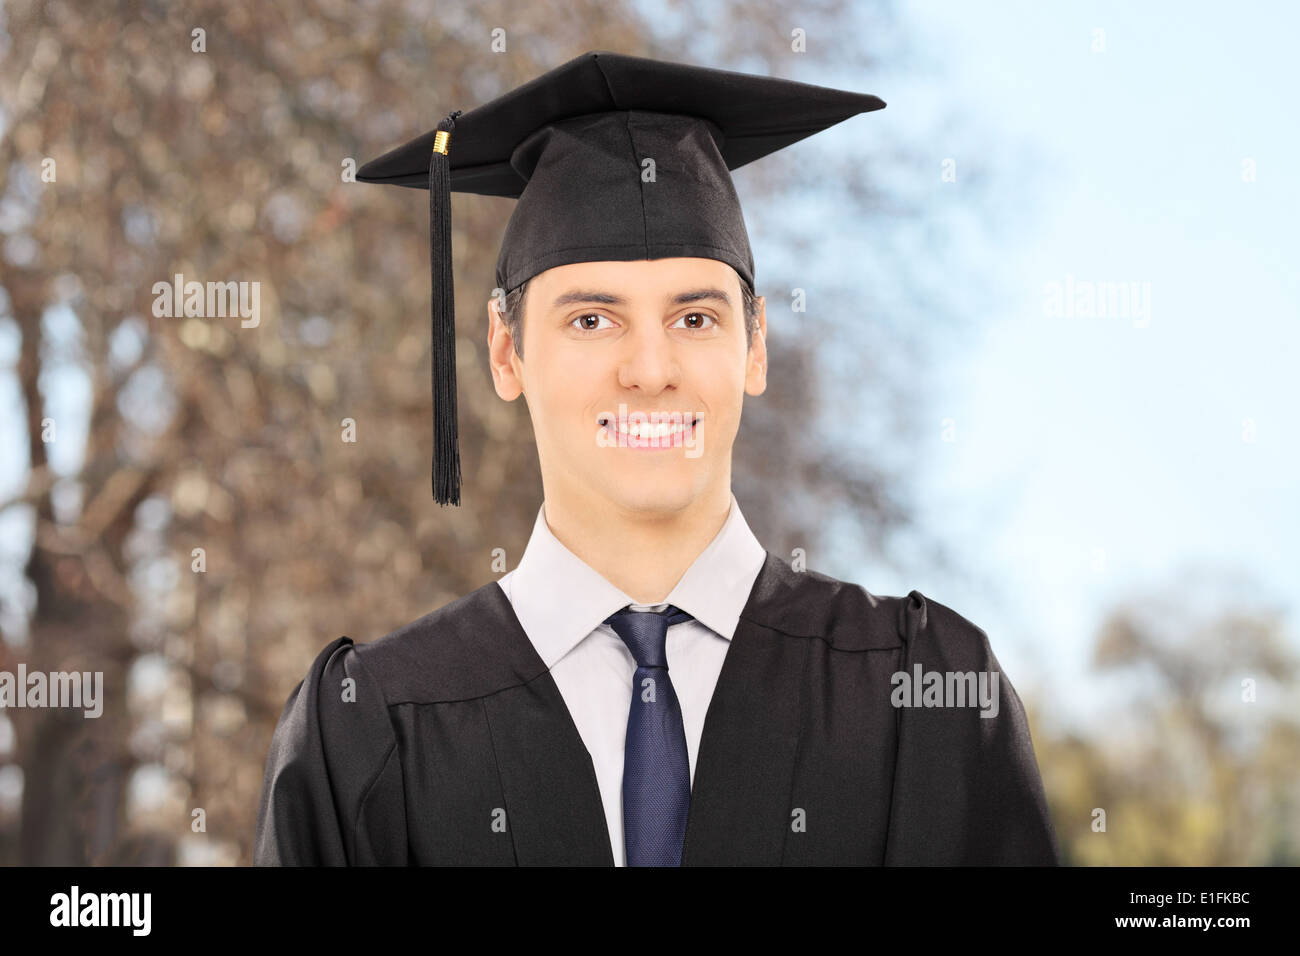 Graduation Goals: Over 10,483 Royalty-Free Licensable Stock Photos |  Shutterstock